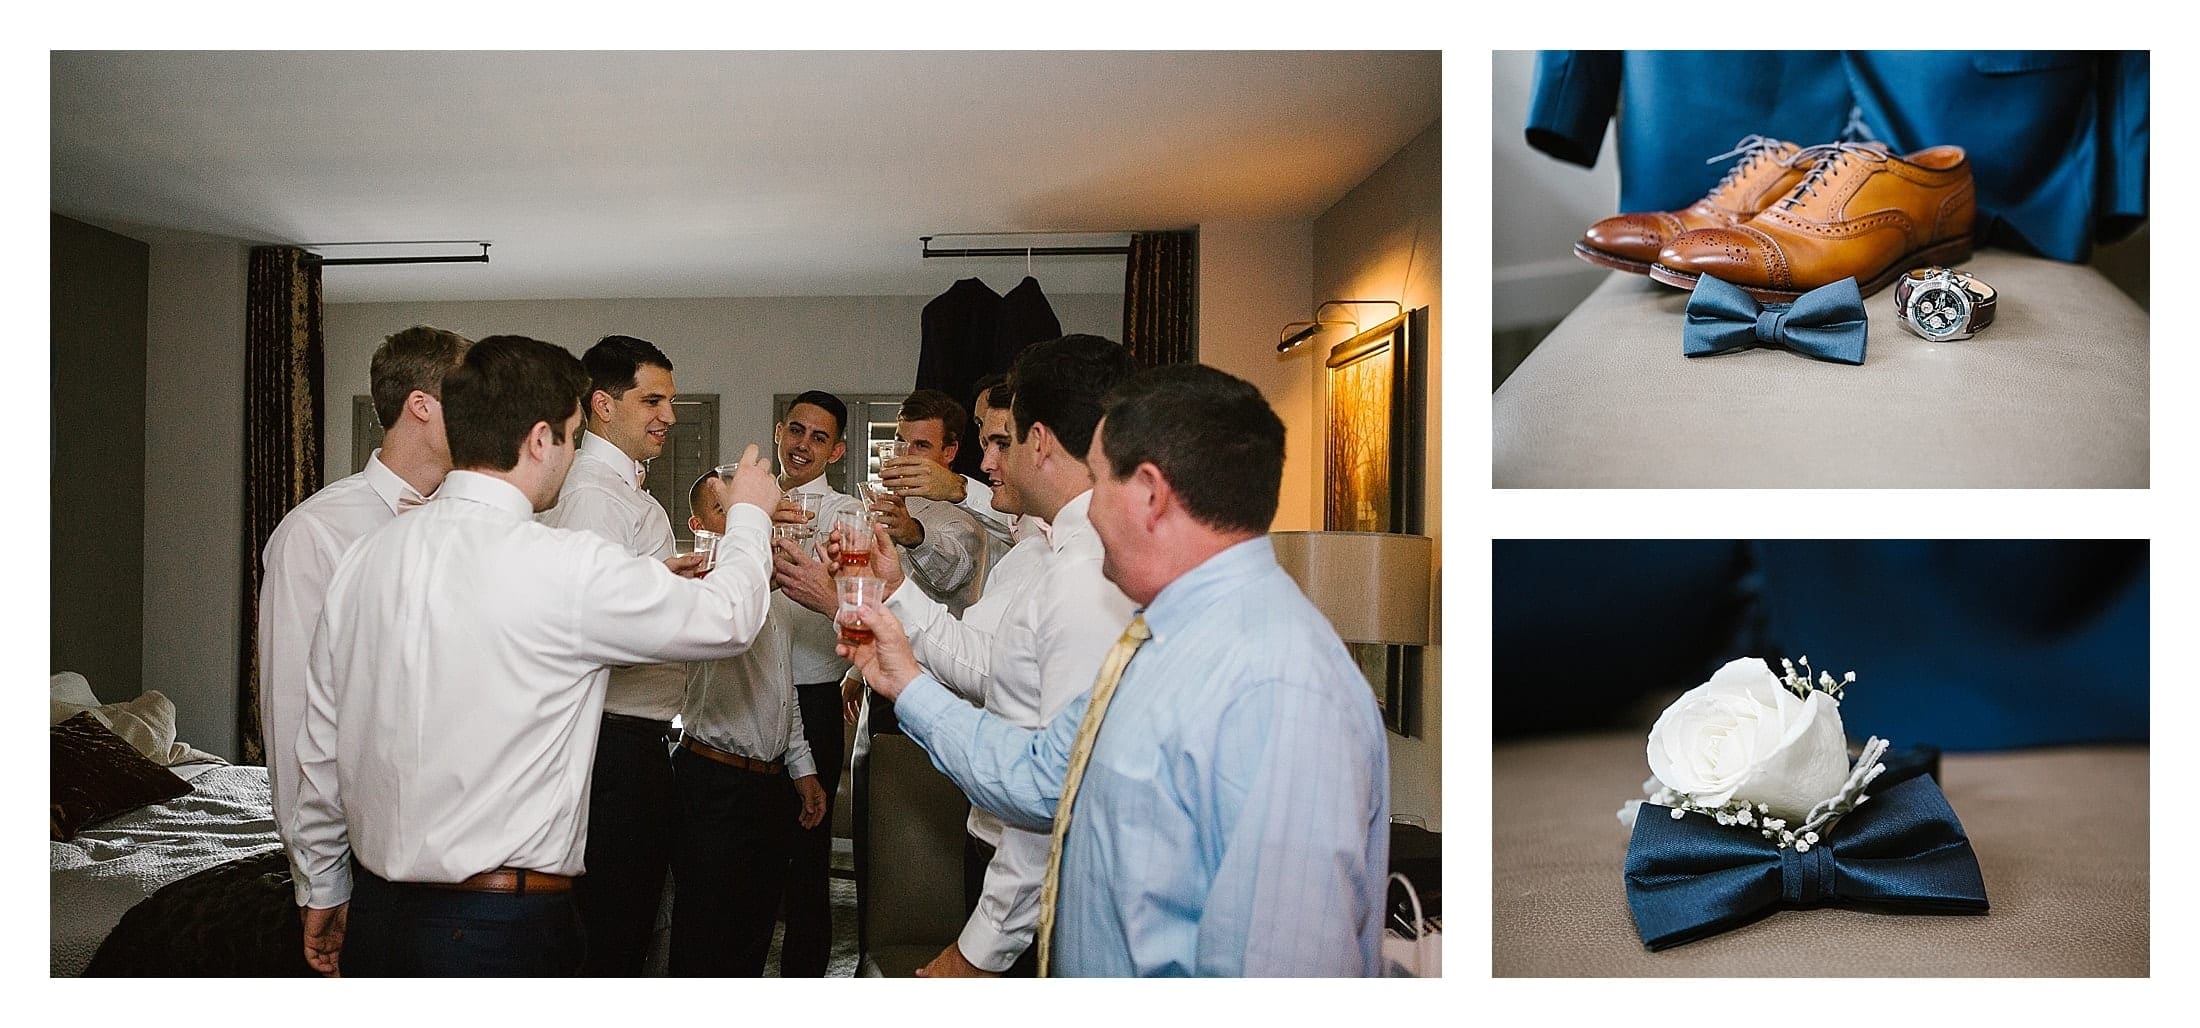 Groomsmen getting ready and laughing. Wedding photos by Kathy Beaver Photography.